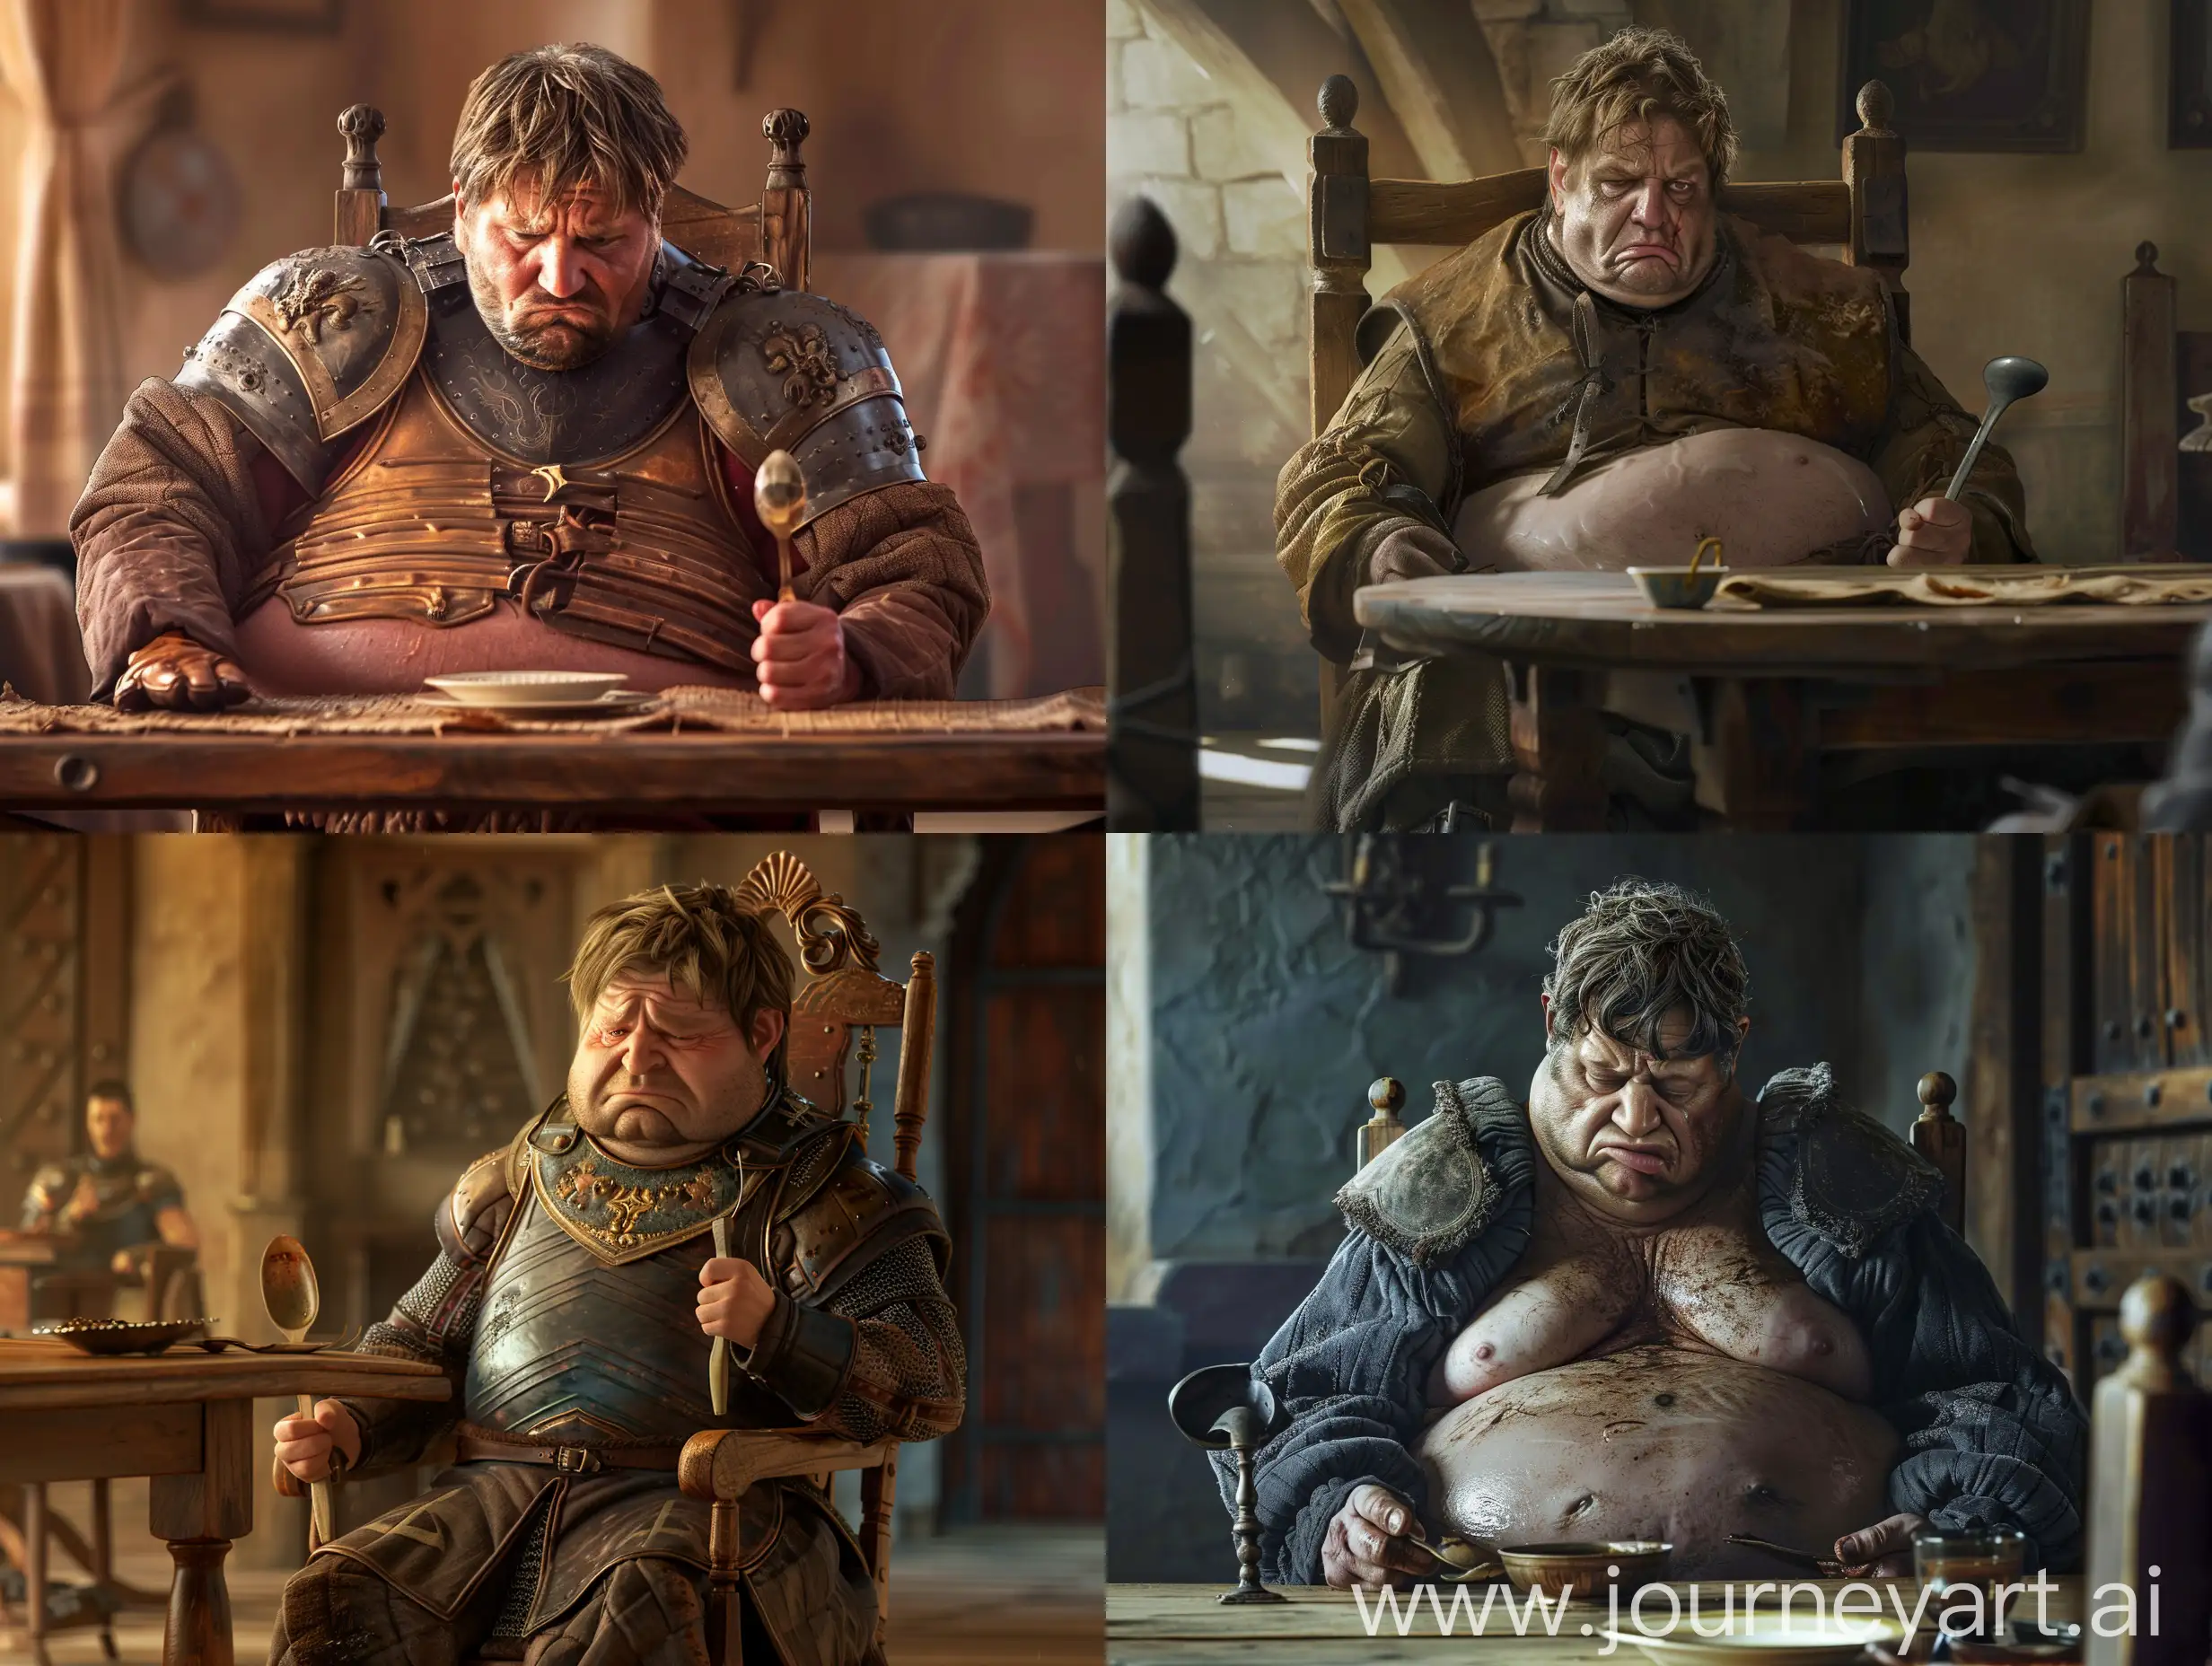 Jaime Lannister (played by Nikolay Caster Waldo) in the Game of Thrones series, Jaime Lannister is fat and has a fat face and body, Jaime Lannister with the same body and fat face sits at the dining table of Winterfell, Jaime Lannister with the same body and fat face Sitting on a wooden chair, Jaime Lannister is sad and hungry. Jaime Lannister holding a spoon in his right hand, Jaime Lannister holding a fork in his left hand, Jaime Lannister's expression is one of pure despair, the background is the dining room of Winterfell, the lighting is classic, q2